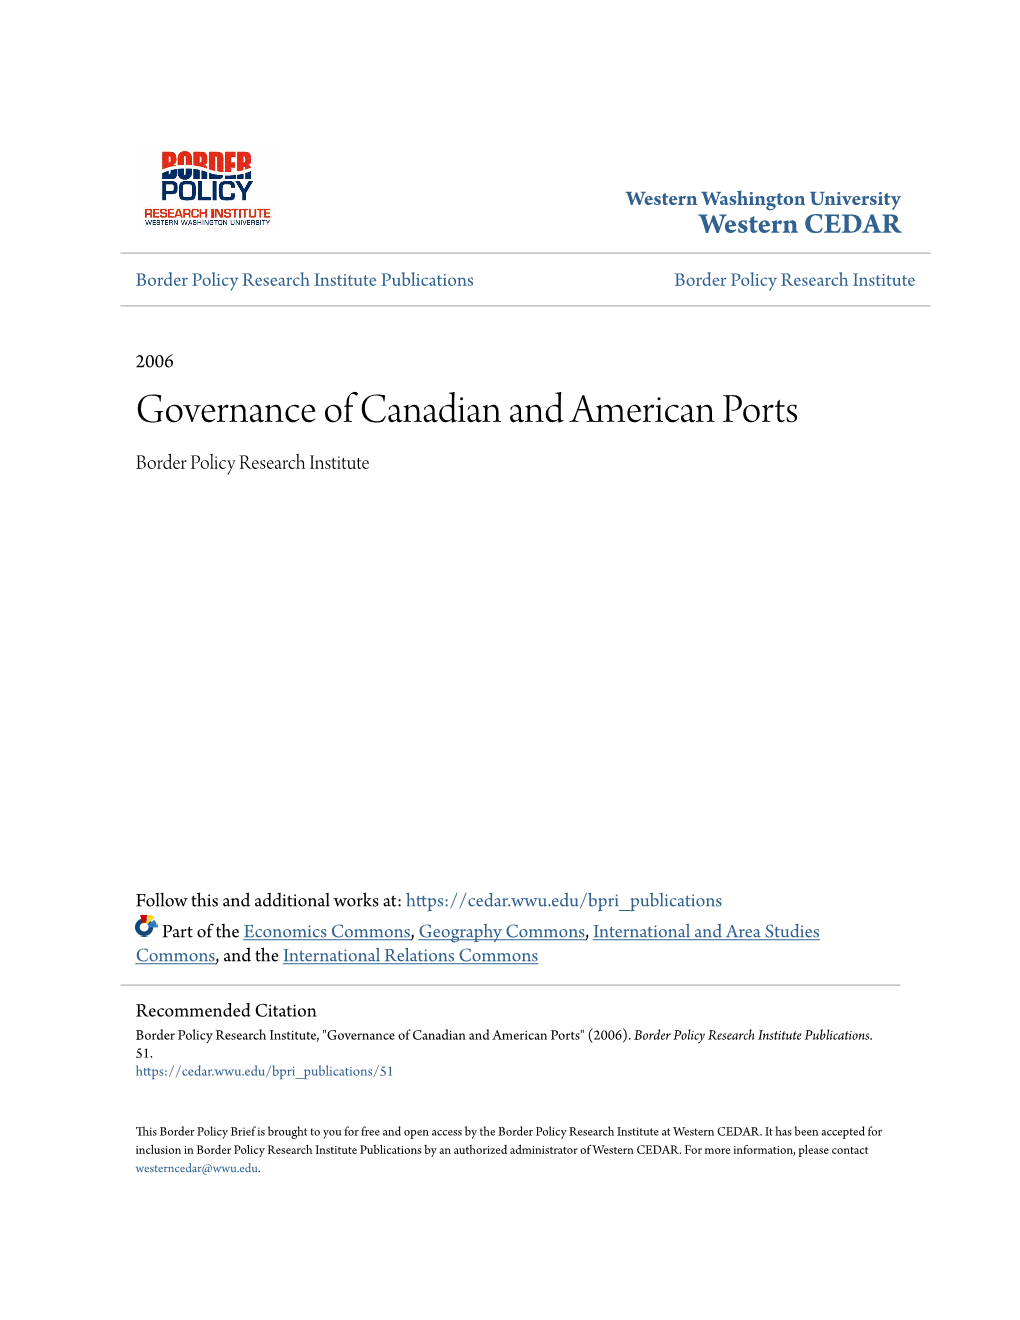 Governance of Canadian and American Ports Border Policy Research Institute